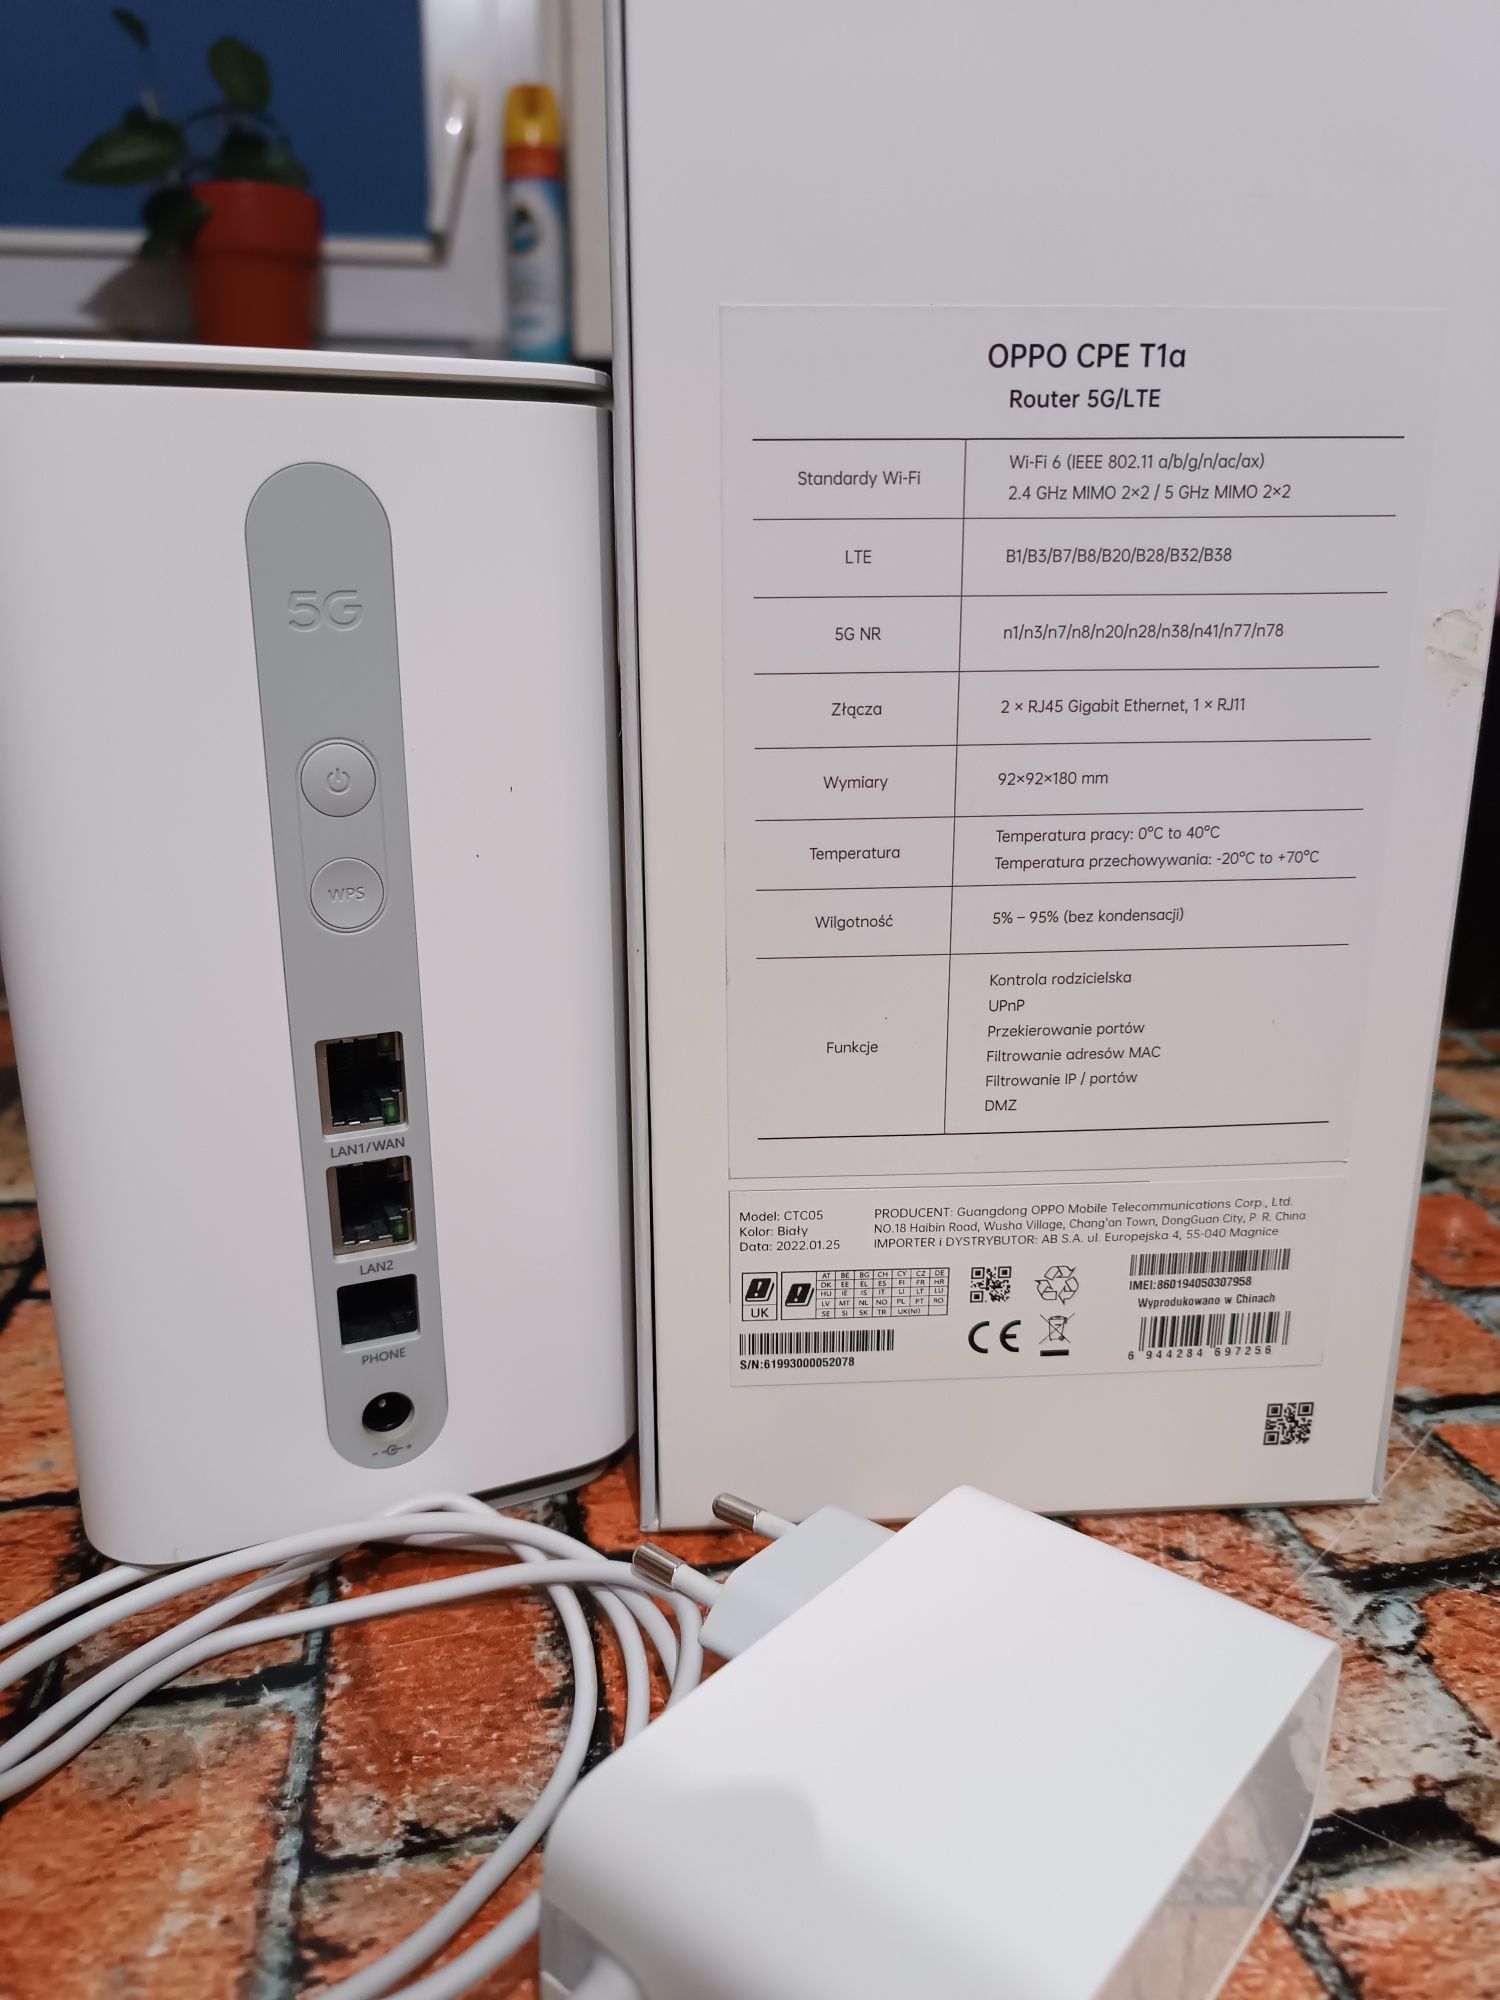 Router OPPO 5G CPE T1a